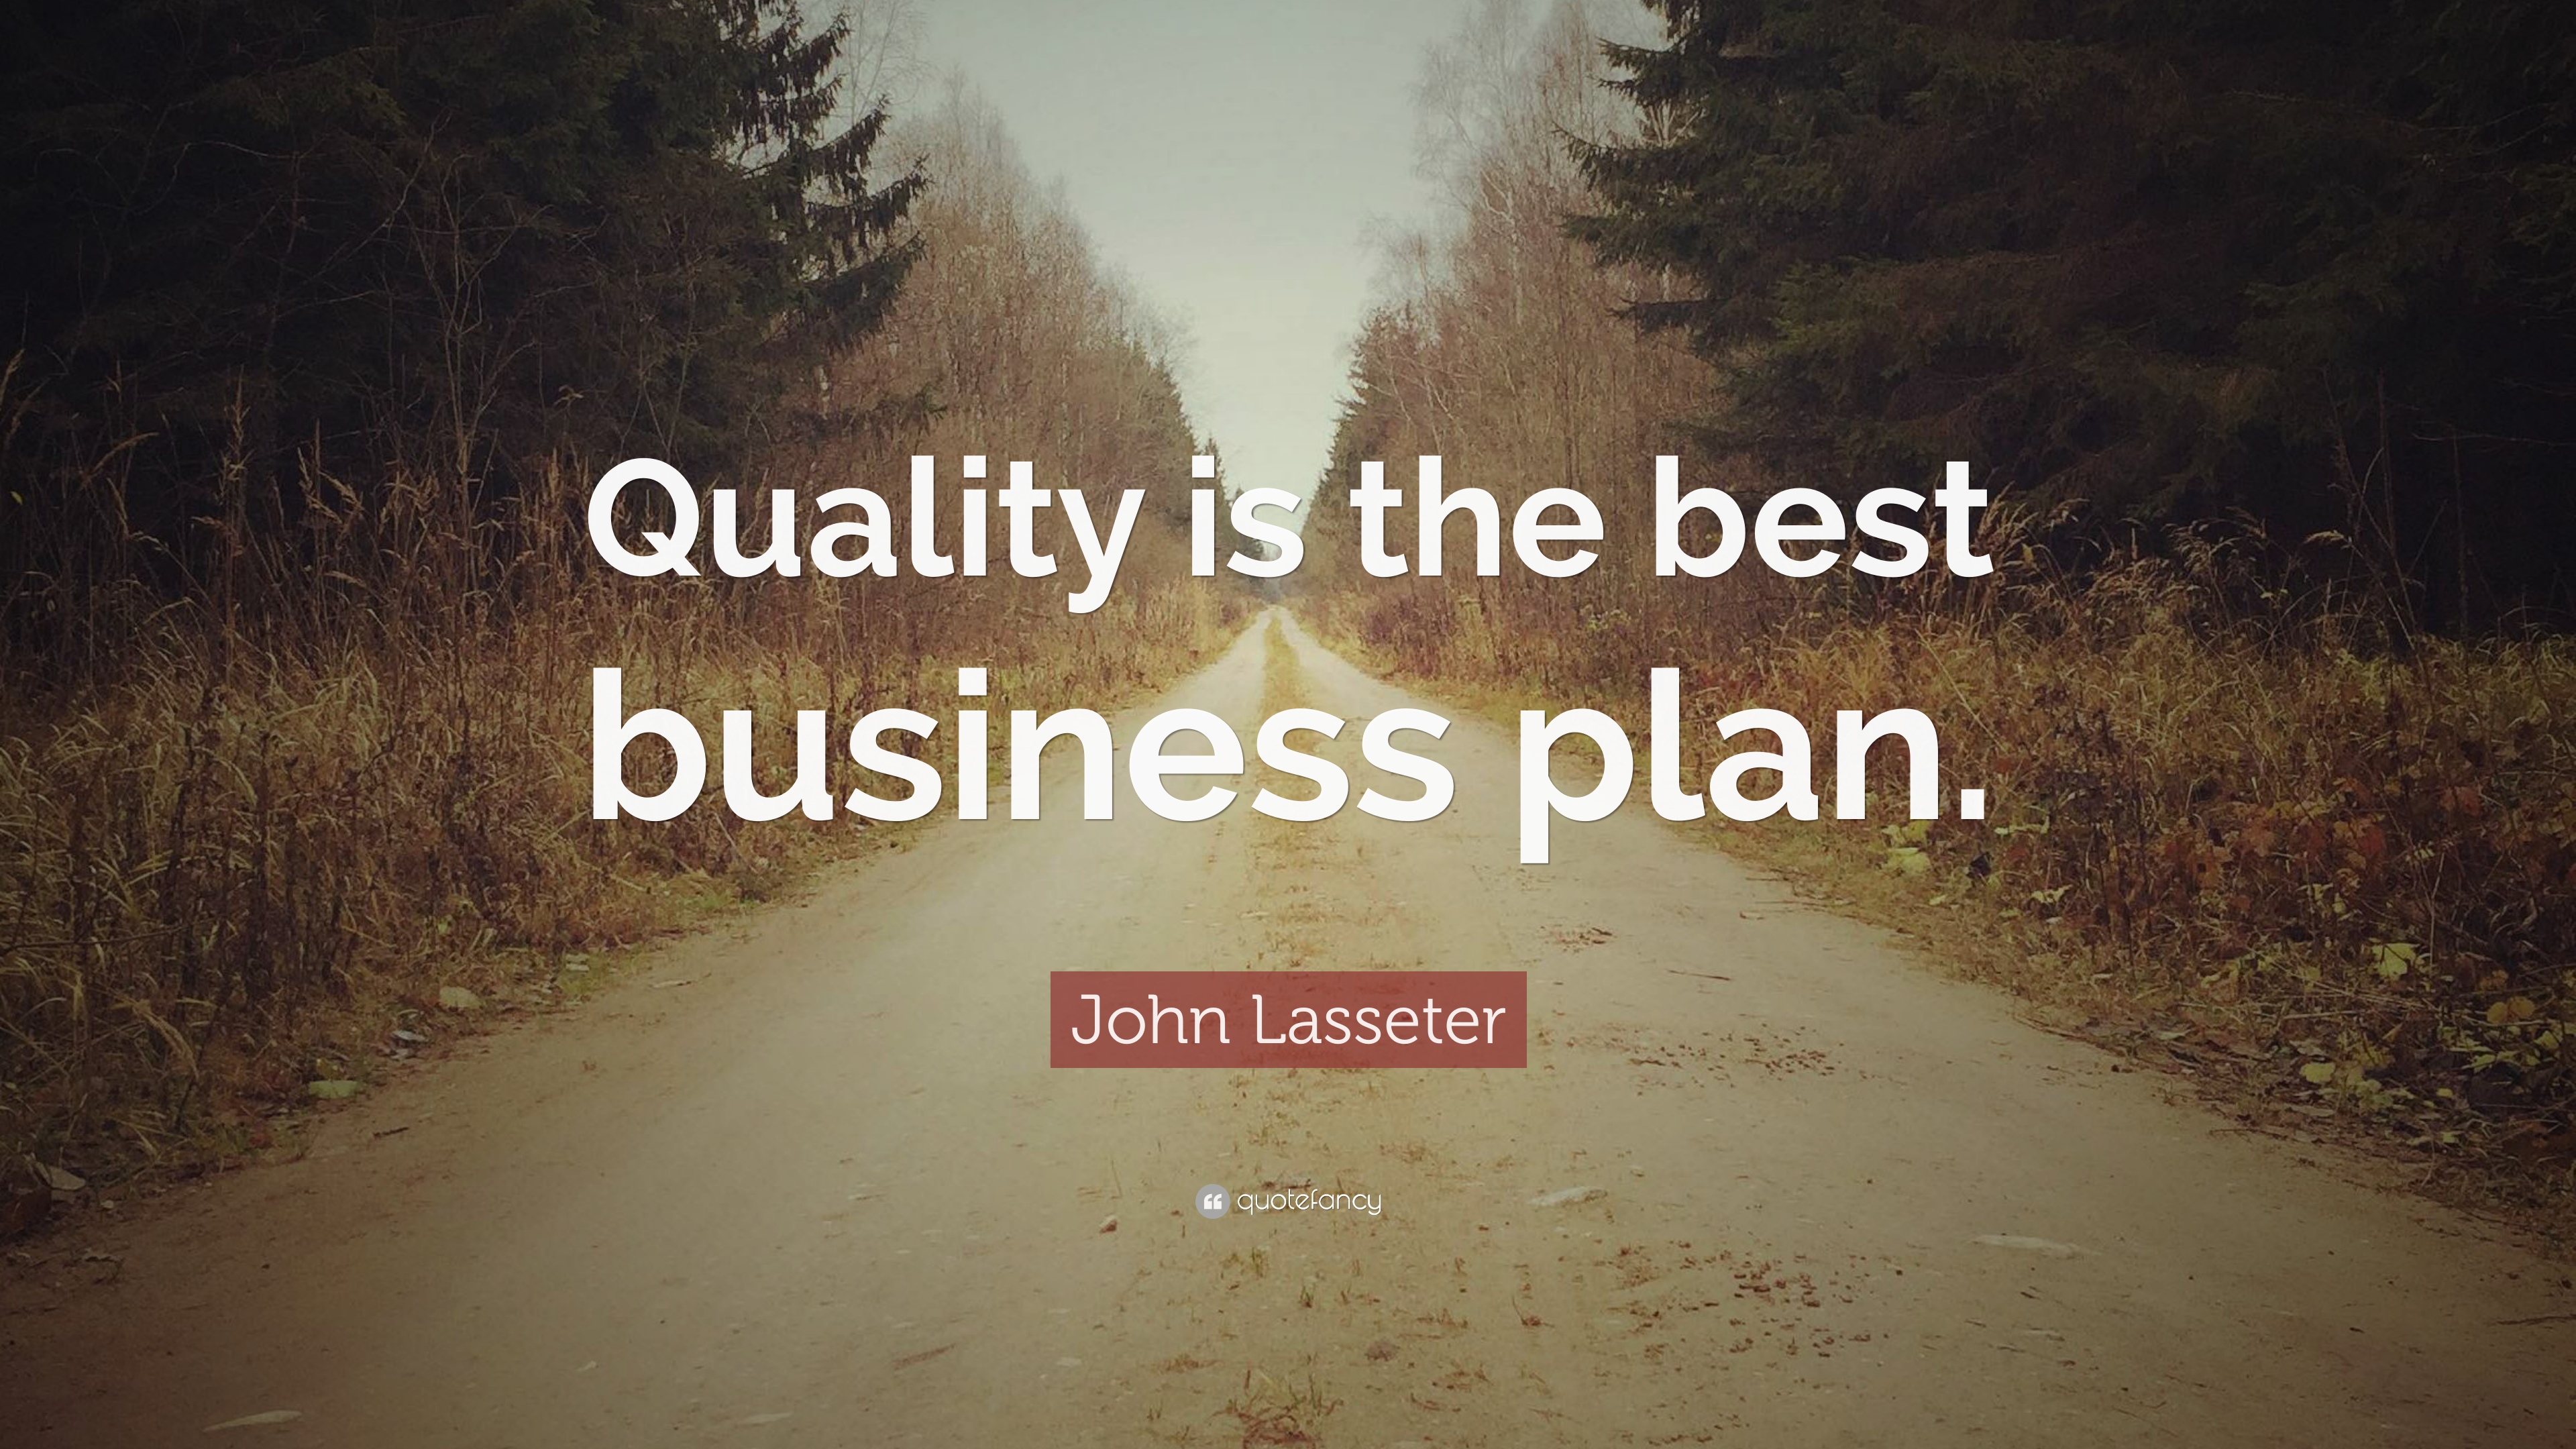 John Lasseter Quote: “Quality is the best business plan